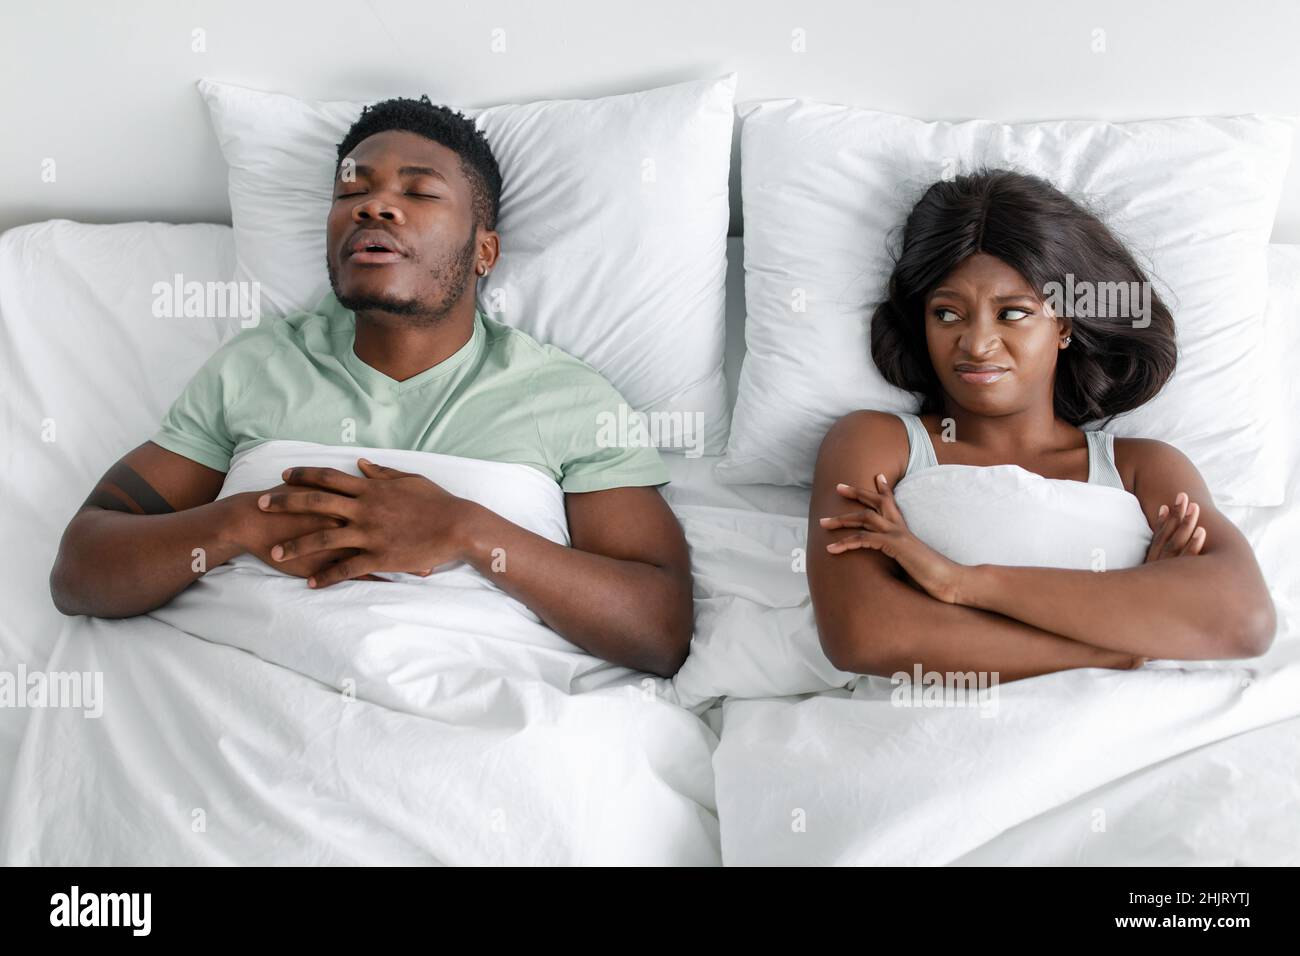 Displeased unhappy millennial african american woman suffers from noise and snoring of sleeping husband on bed Stock Photo